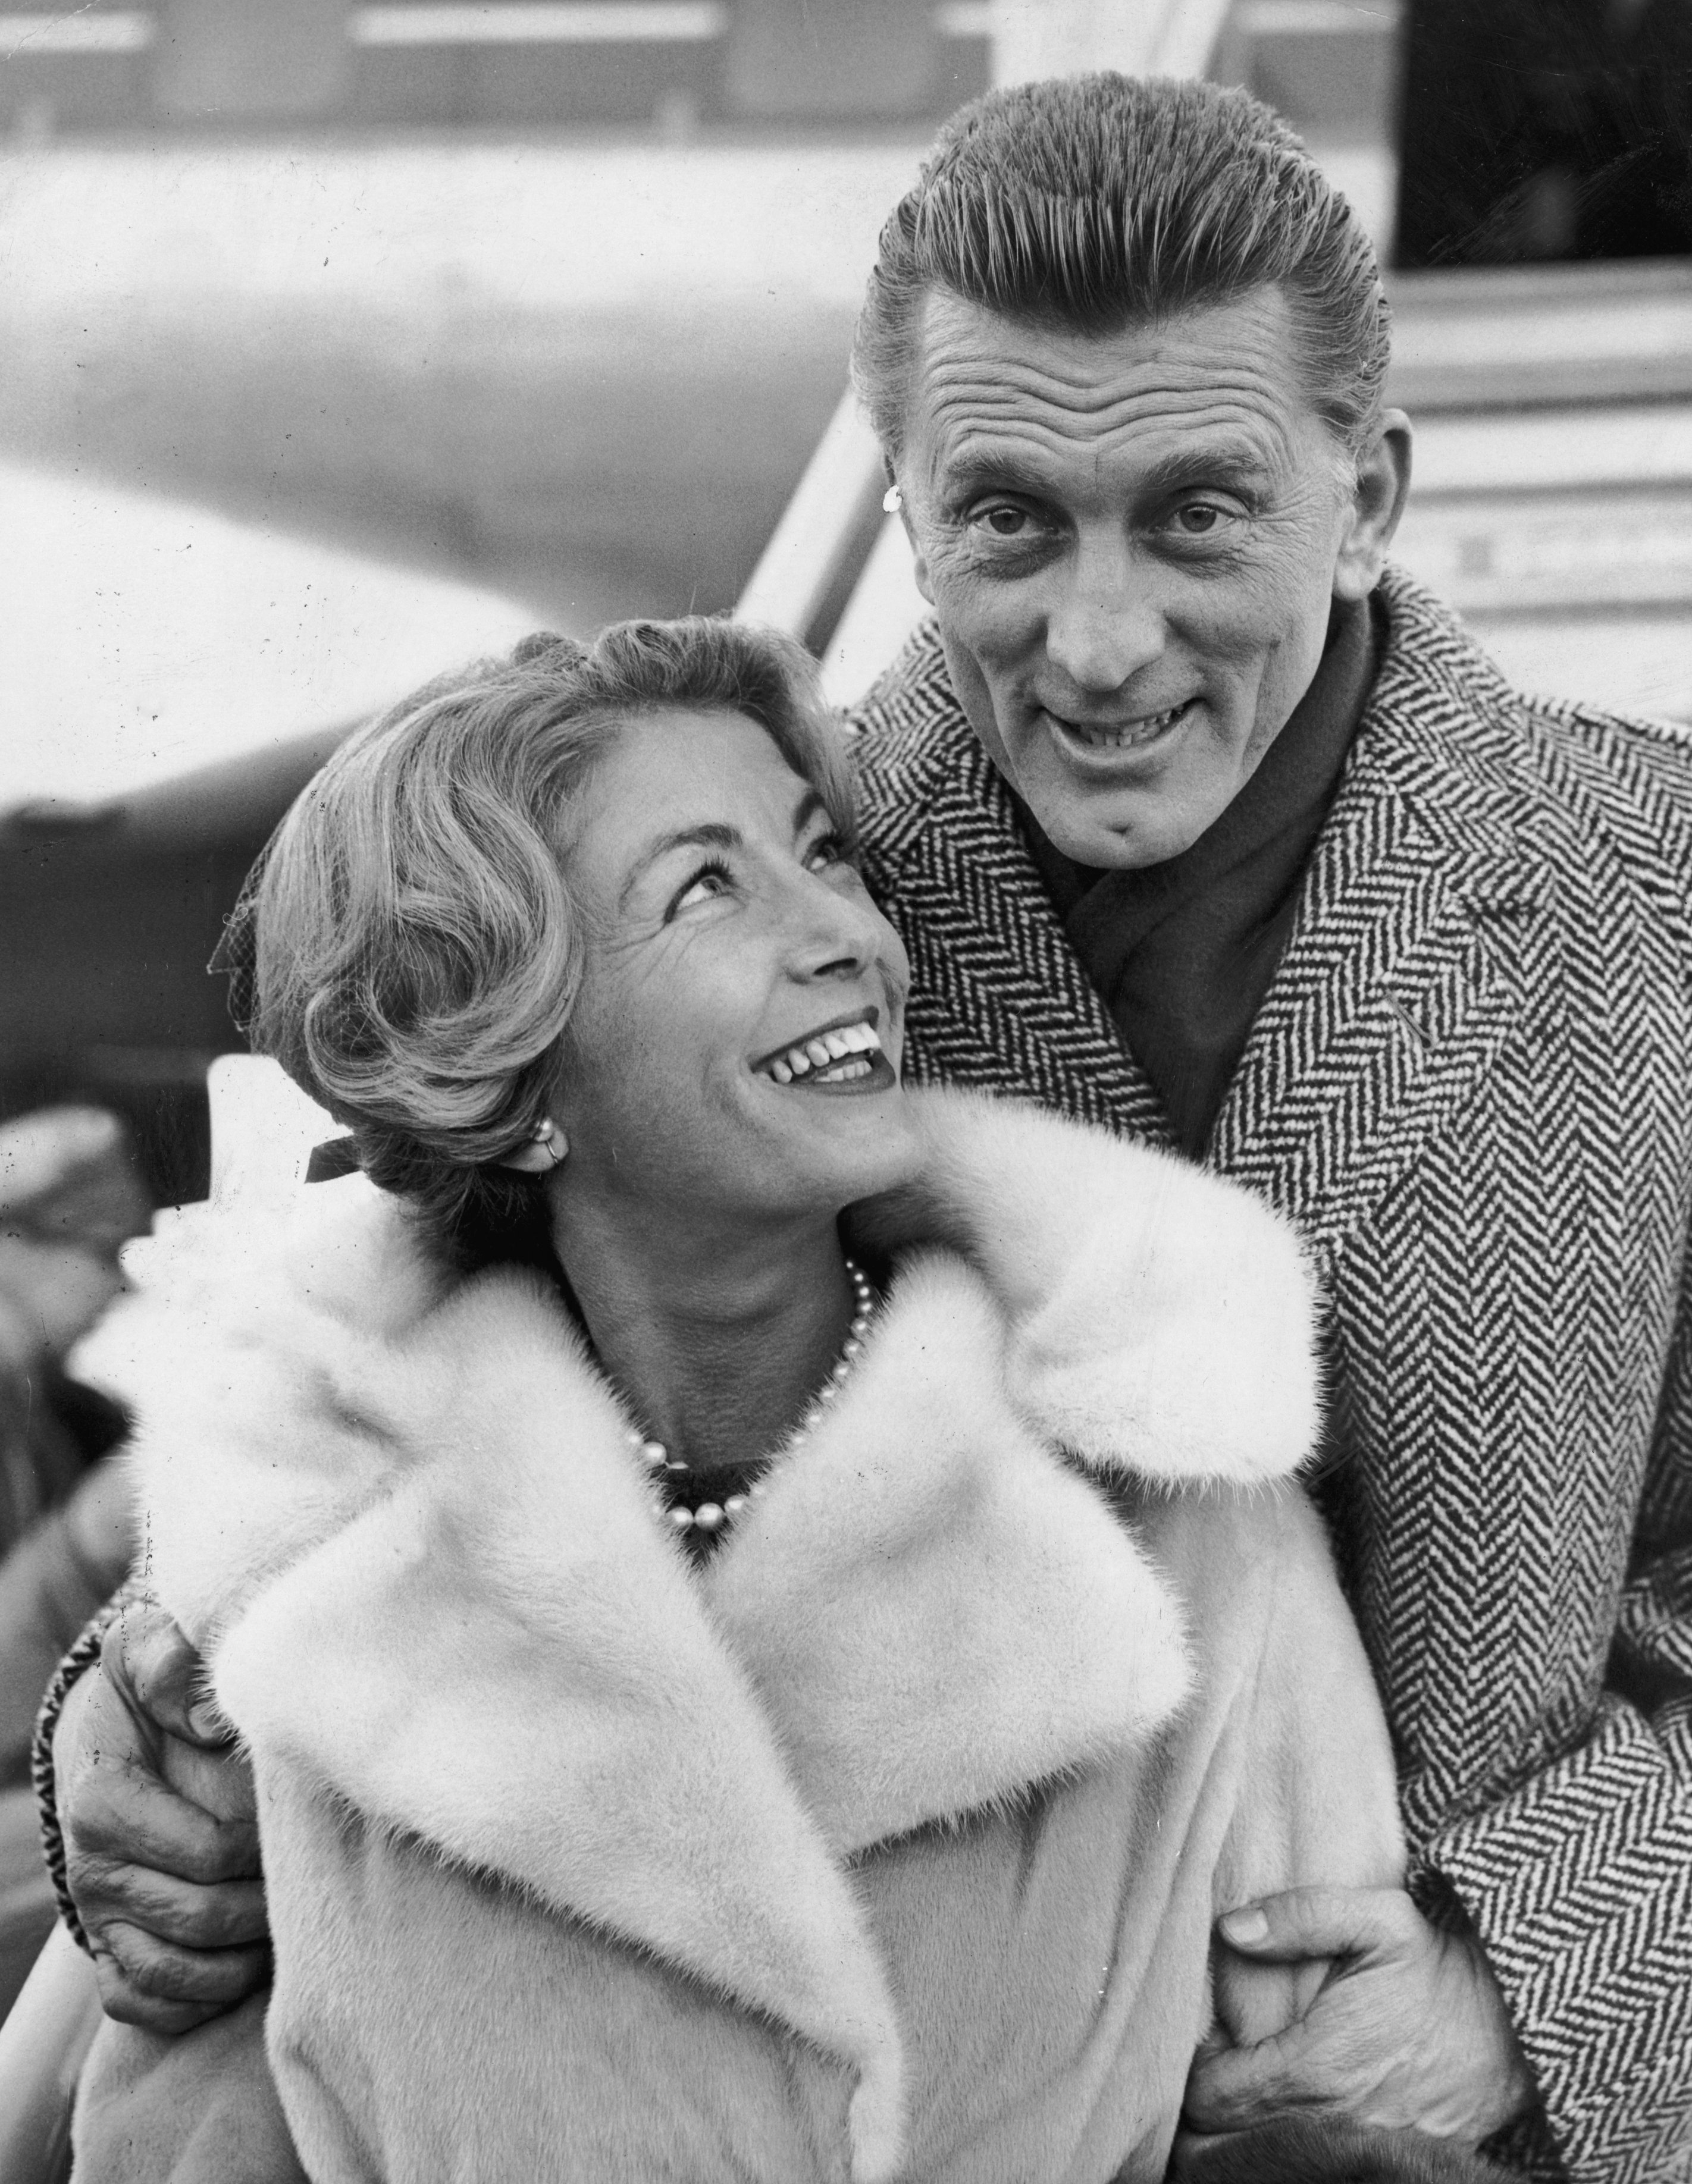 Anne Budyens and Kirk Douglas in London 1960. | Source: Getty Images